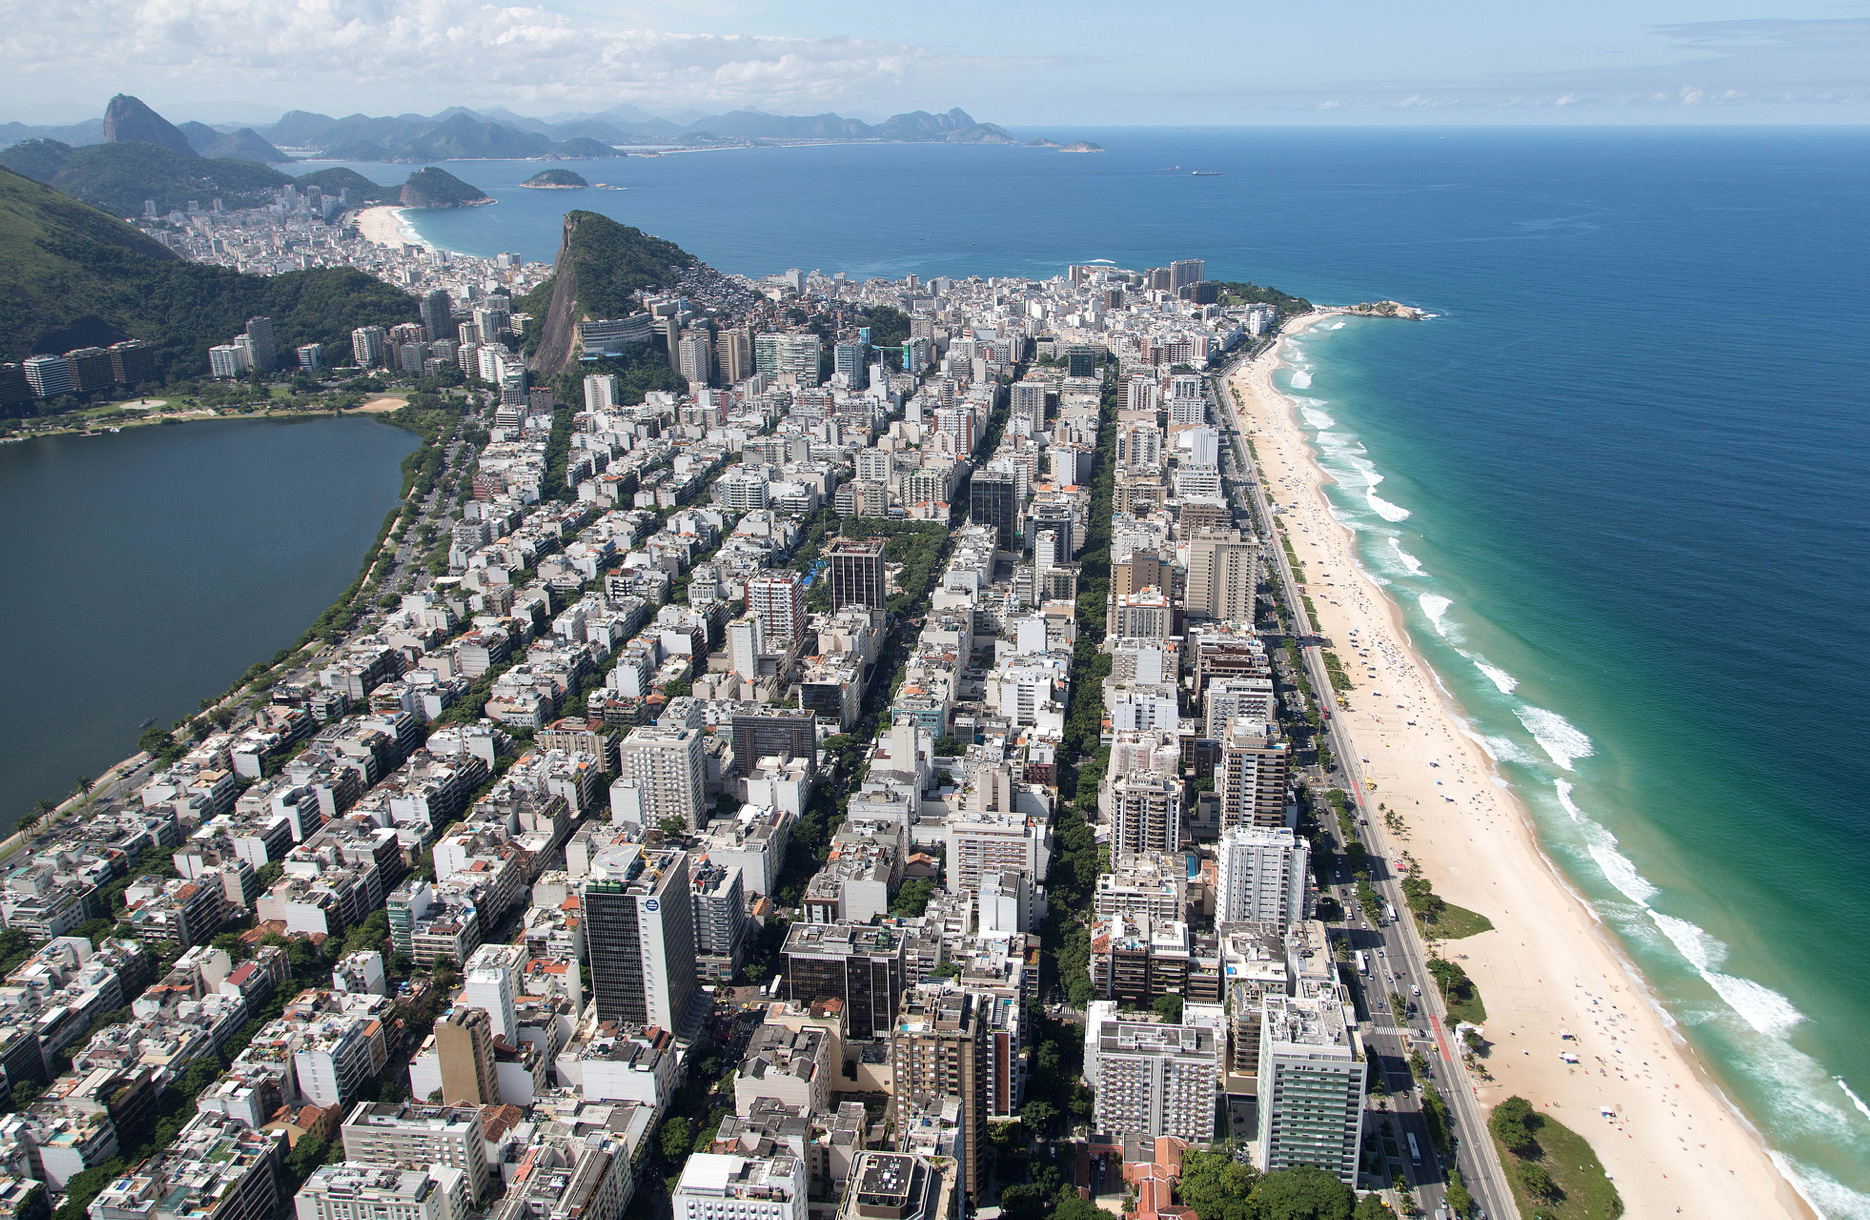 Brazil Residential Sale Prices Stable in June with Nominal Drop